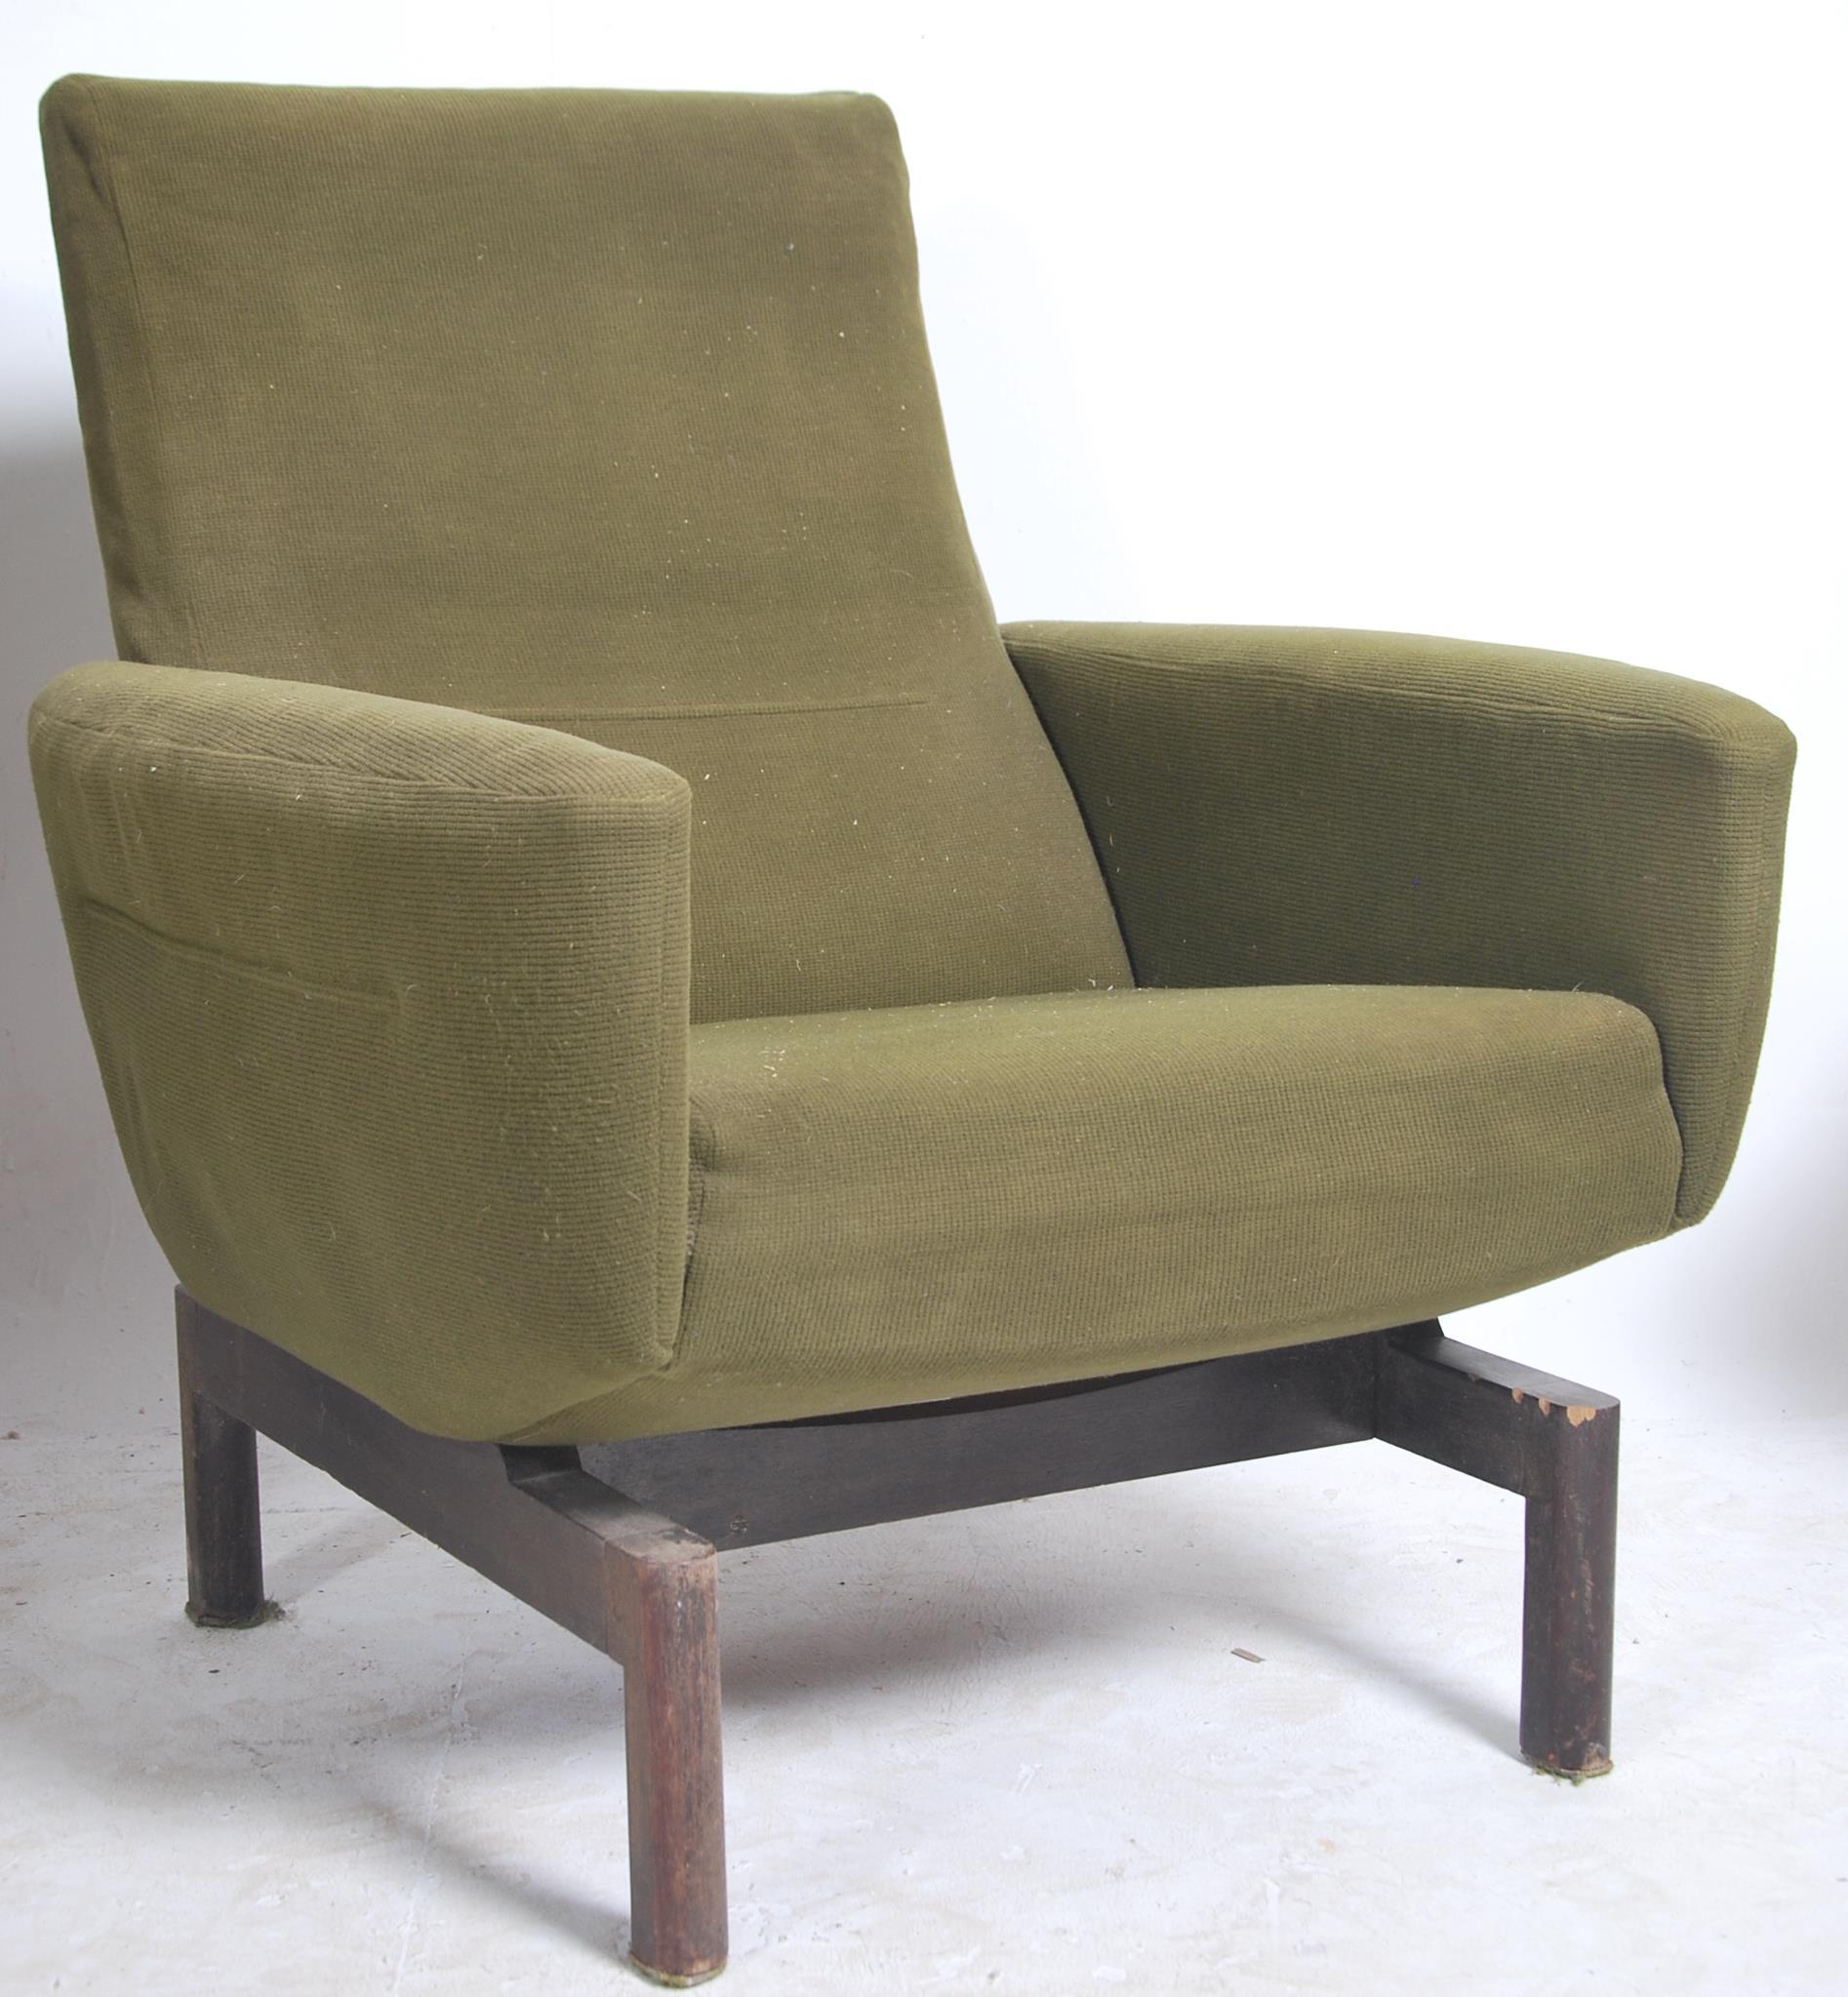 A stunning pair of mid century armchairs in the style of Pierre Guariche / Joseph Andre motte. The - Image 2 of 5